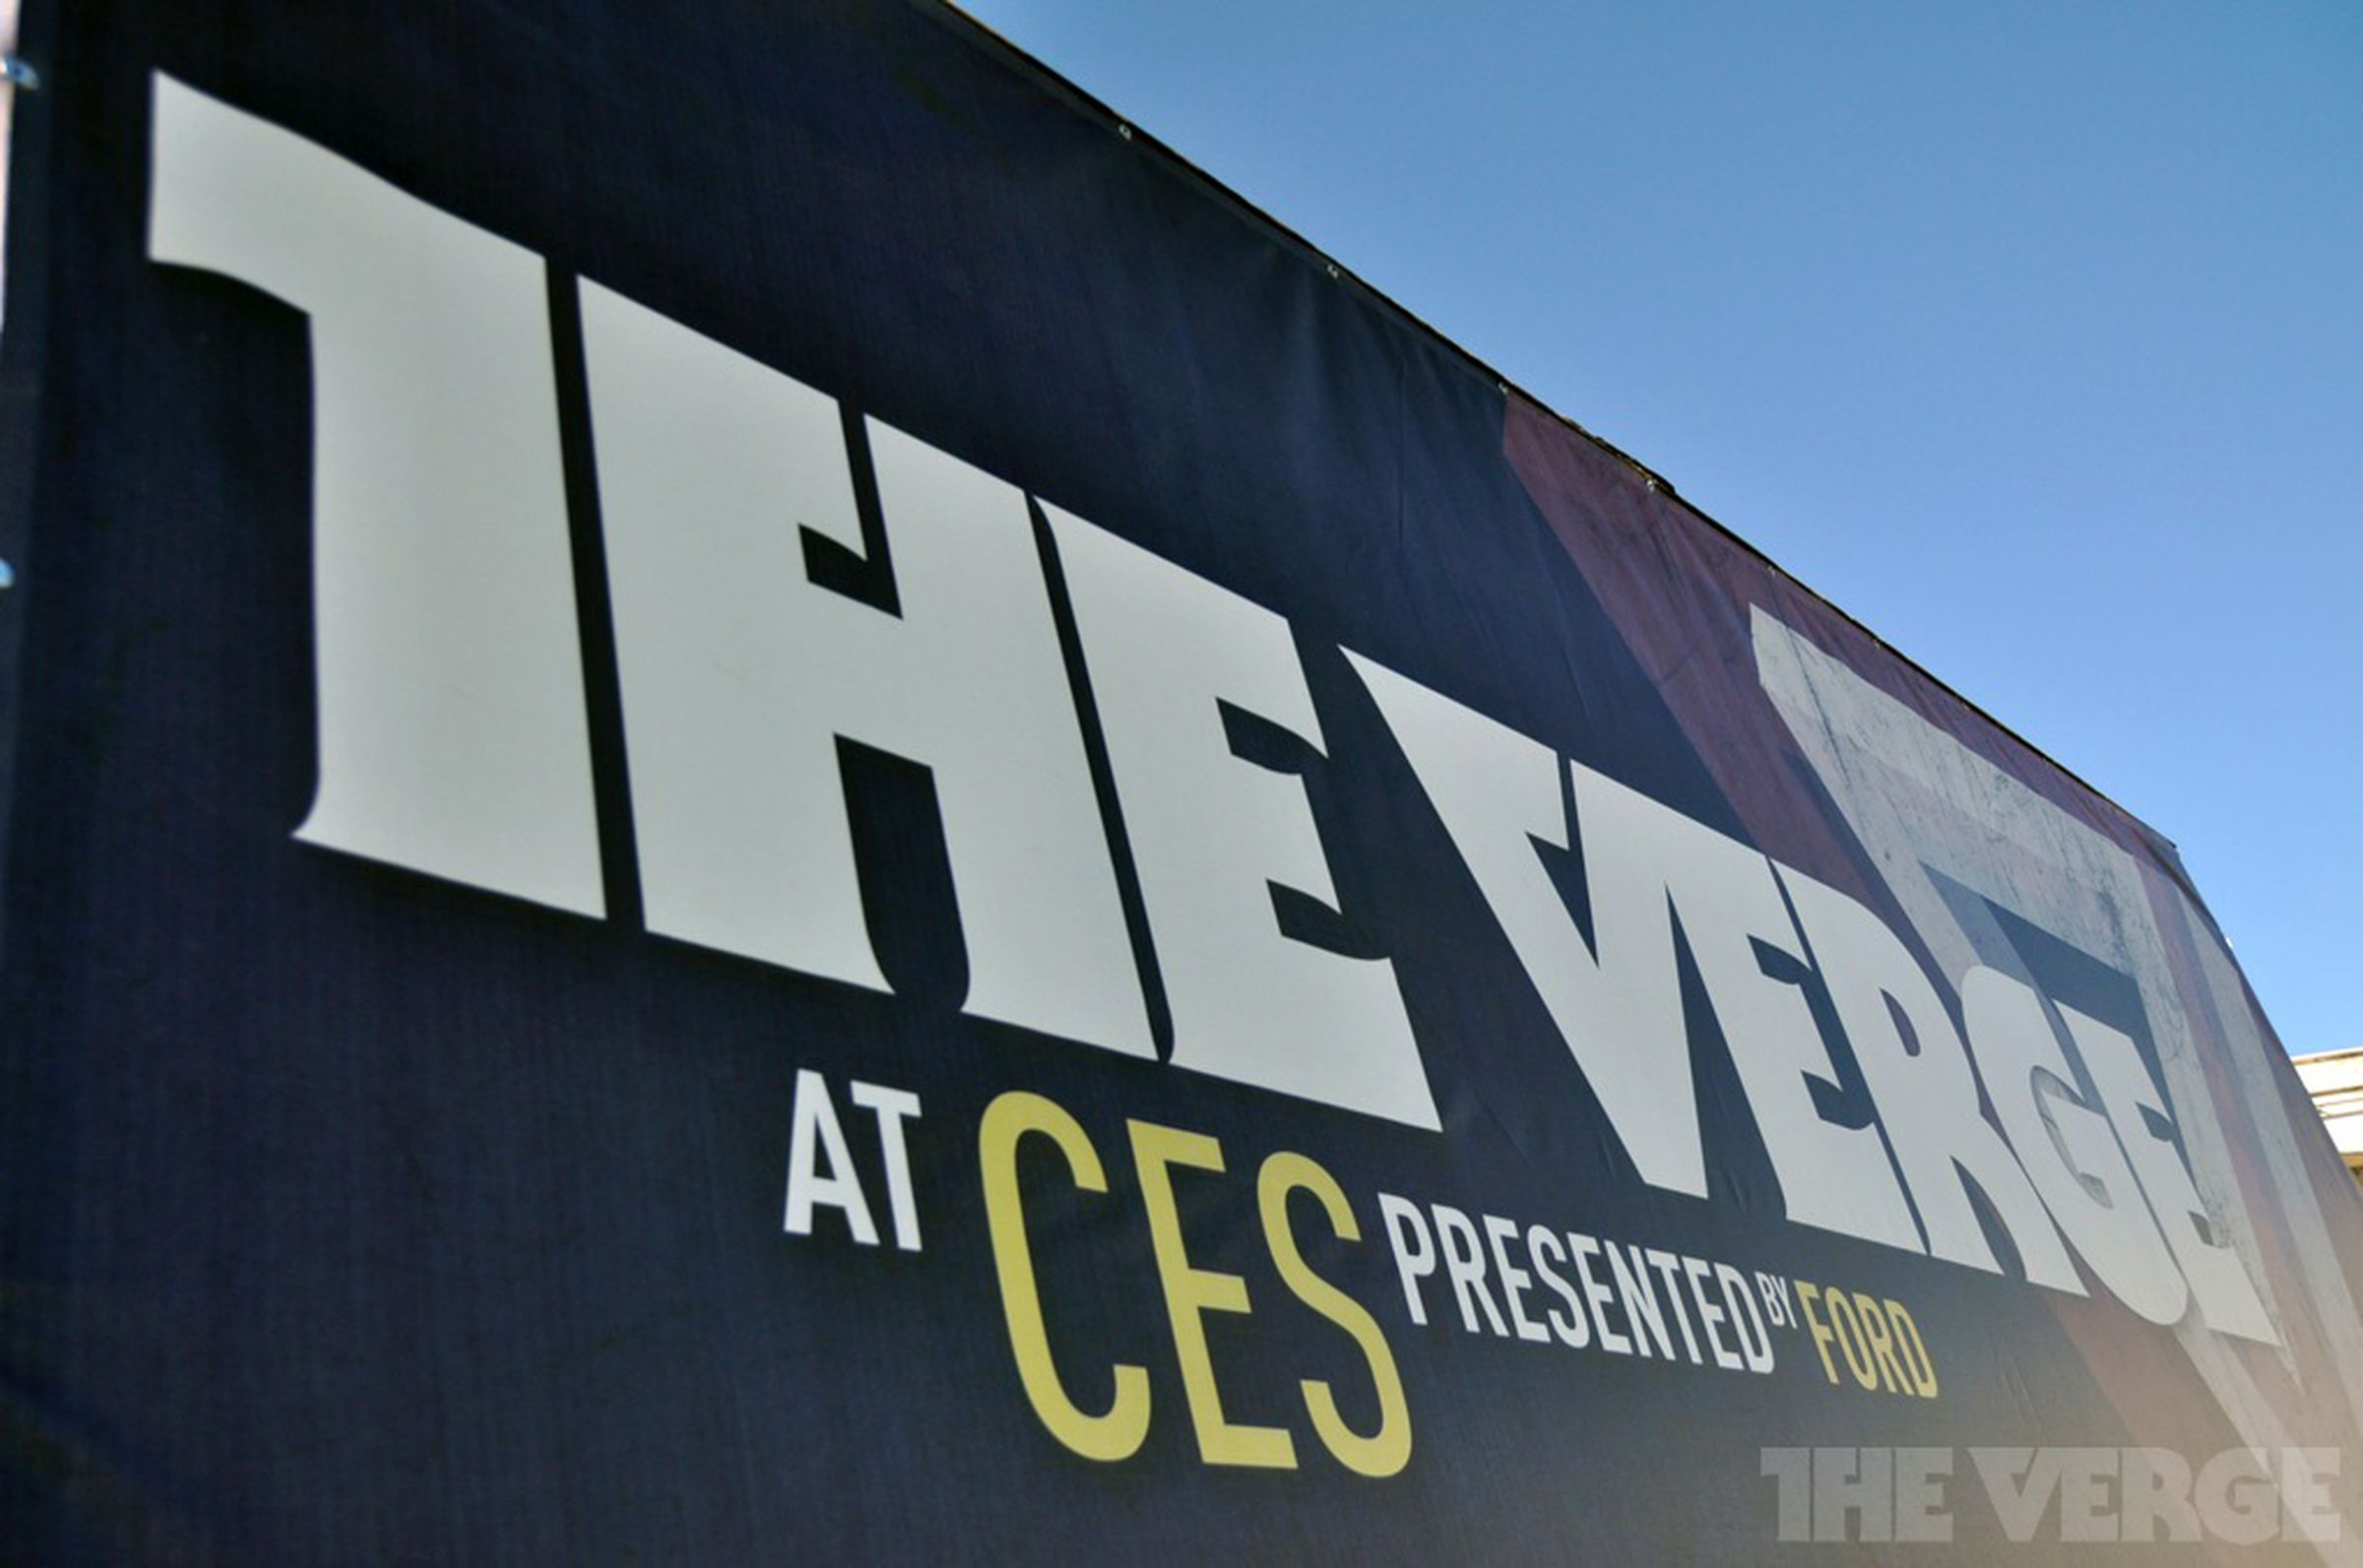 The Verge live at CES 2012